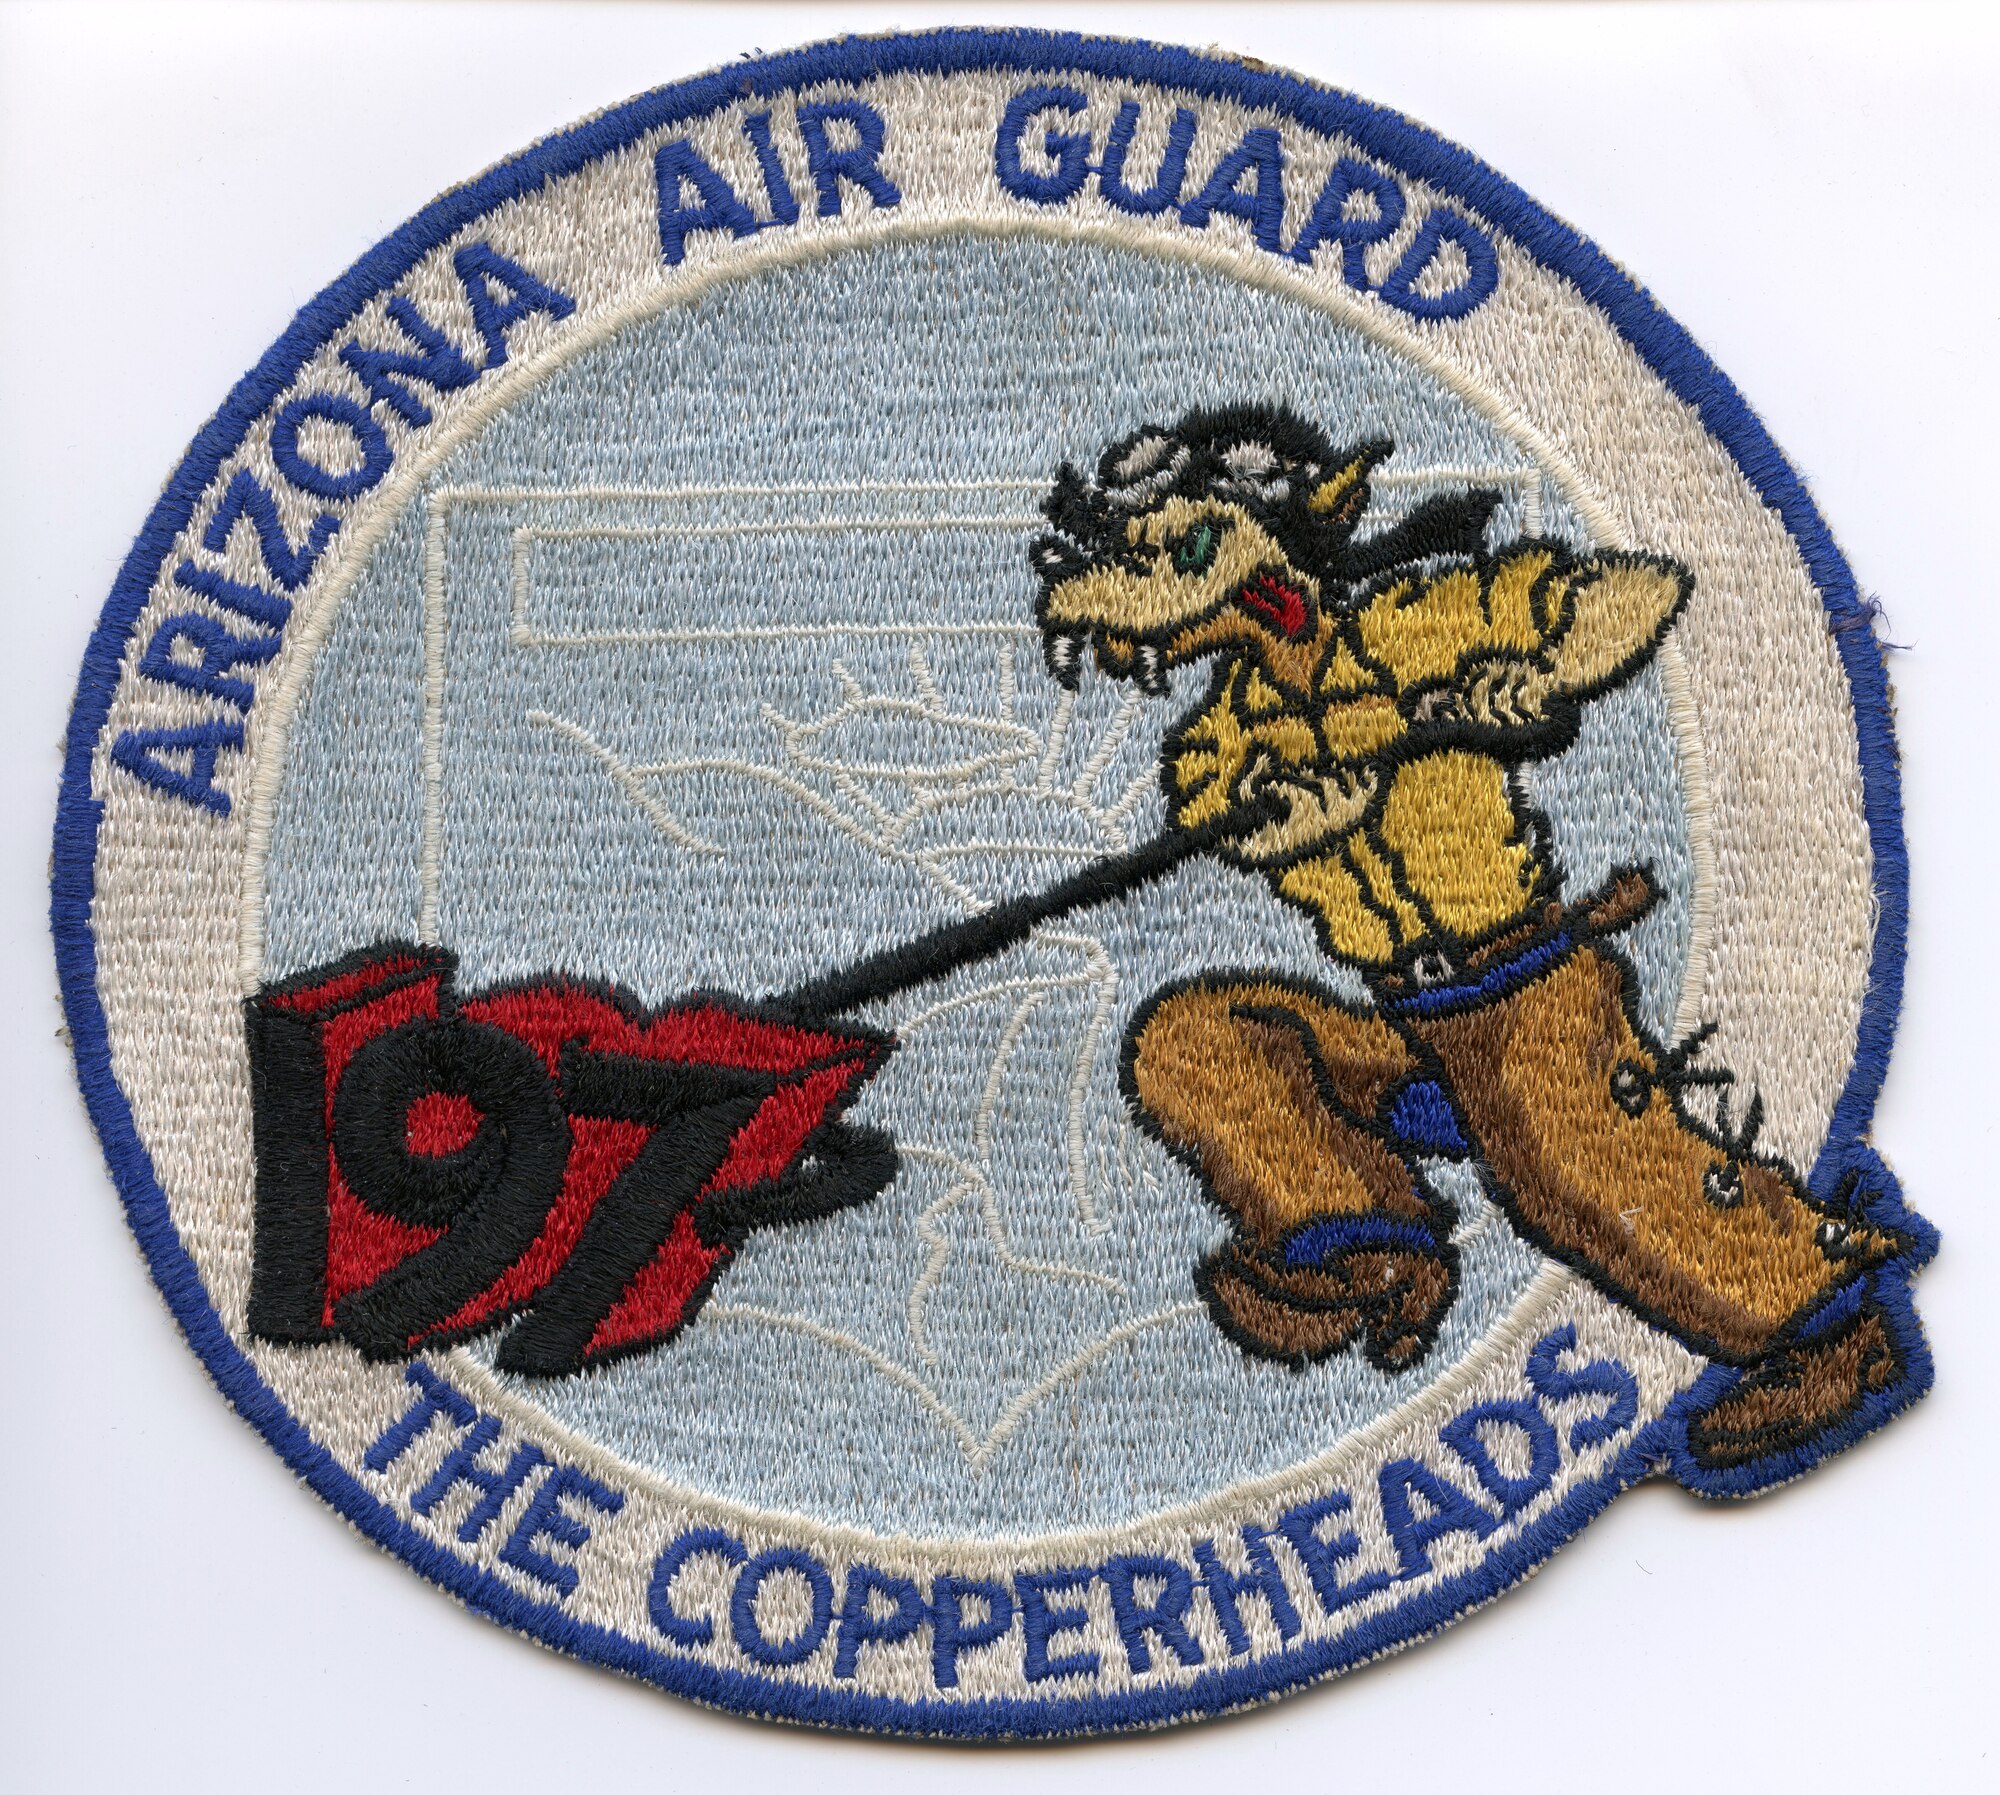 The original patch of the 197th Fighter Squadron, which later became the 161st Air Refueling Wing.